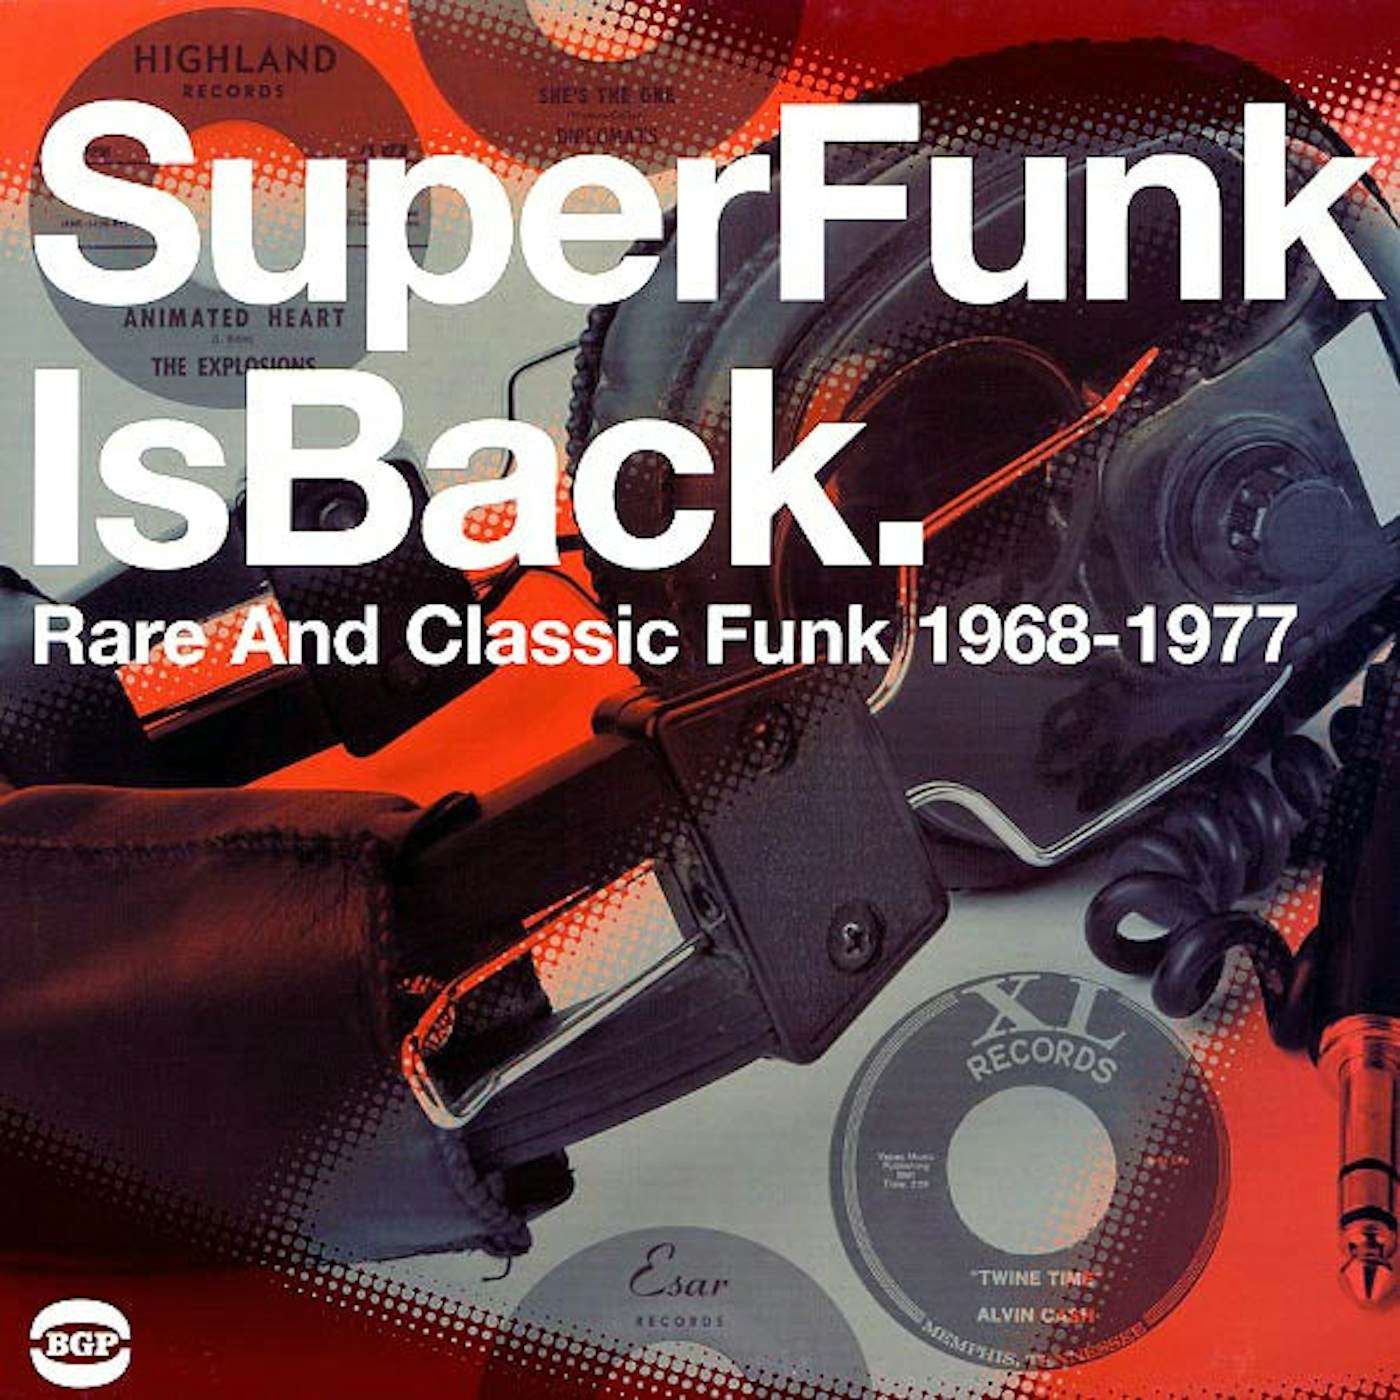 Smokey Wilson, Dyke & The Blazers, The Phillips Brothers, Etc.  LP -  Superfunk Is Back: Rare And Classic Funk 19681977 (2xLP) (Vinyl)